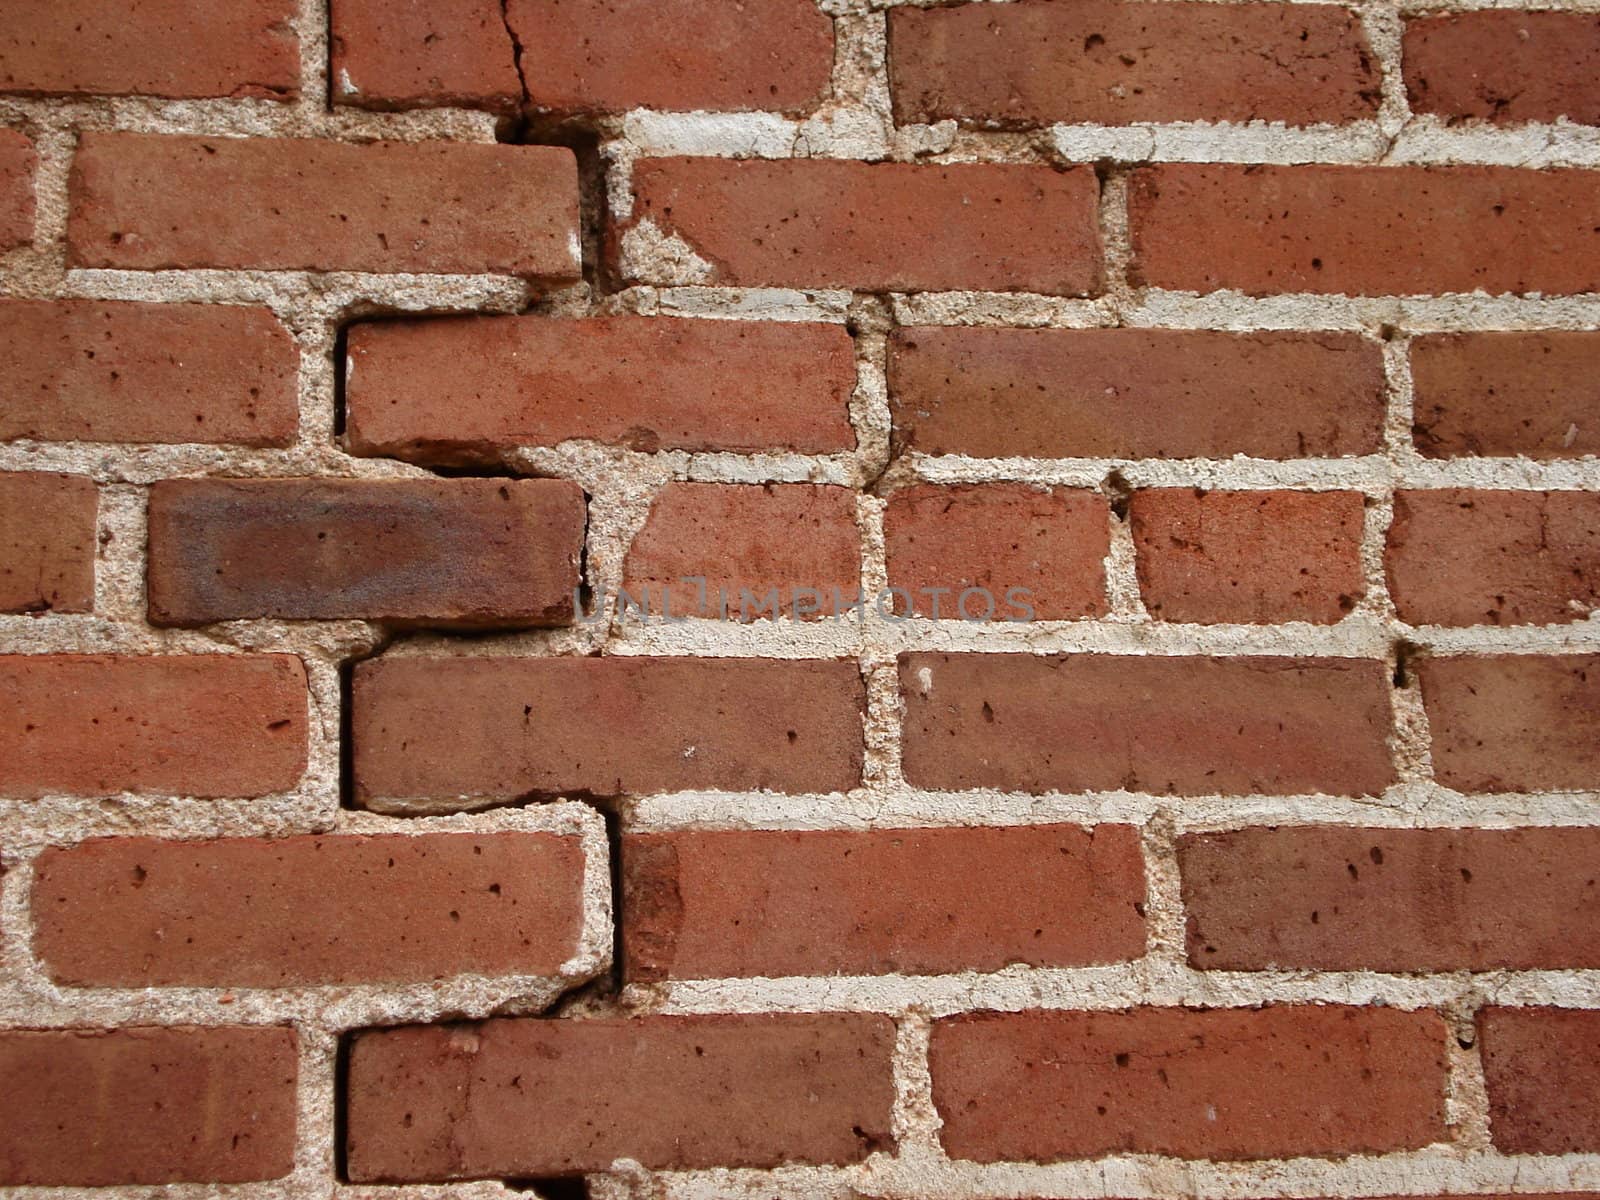 A red brick wall has a vertical crack in it.